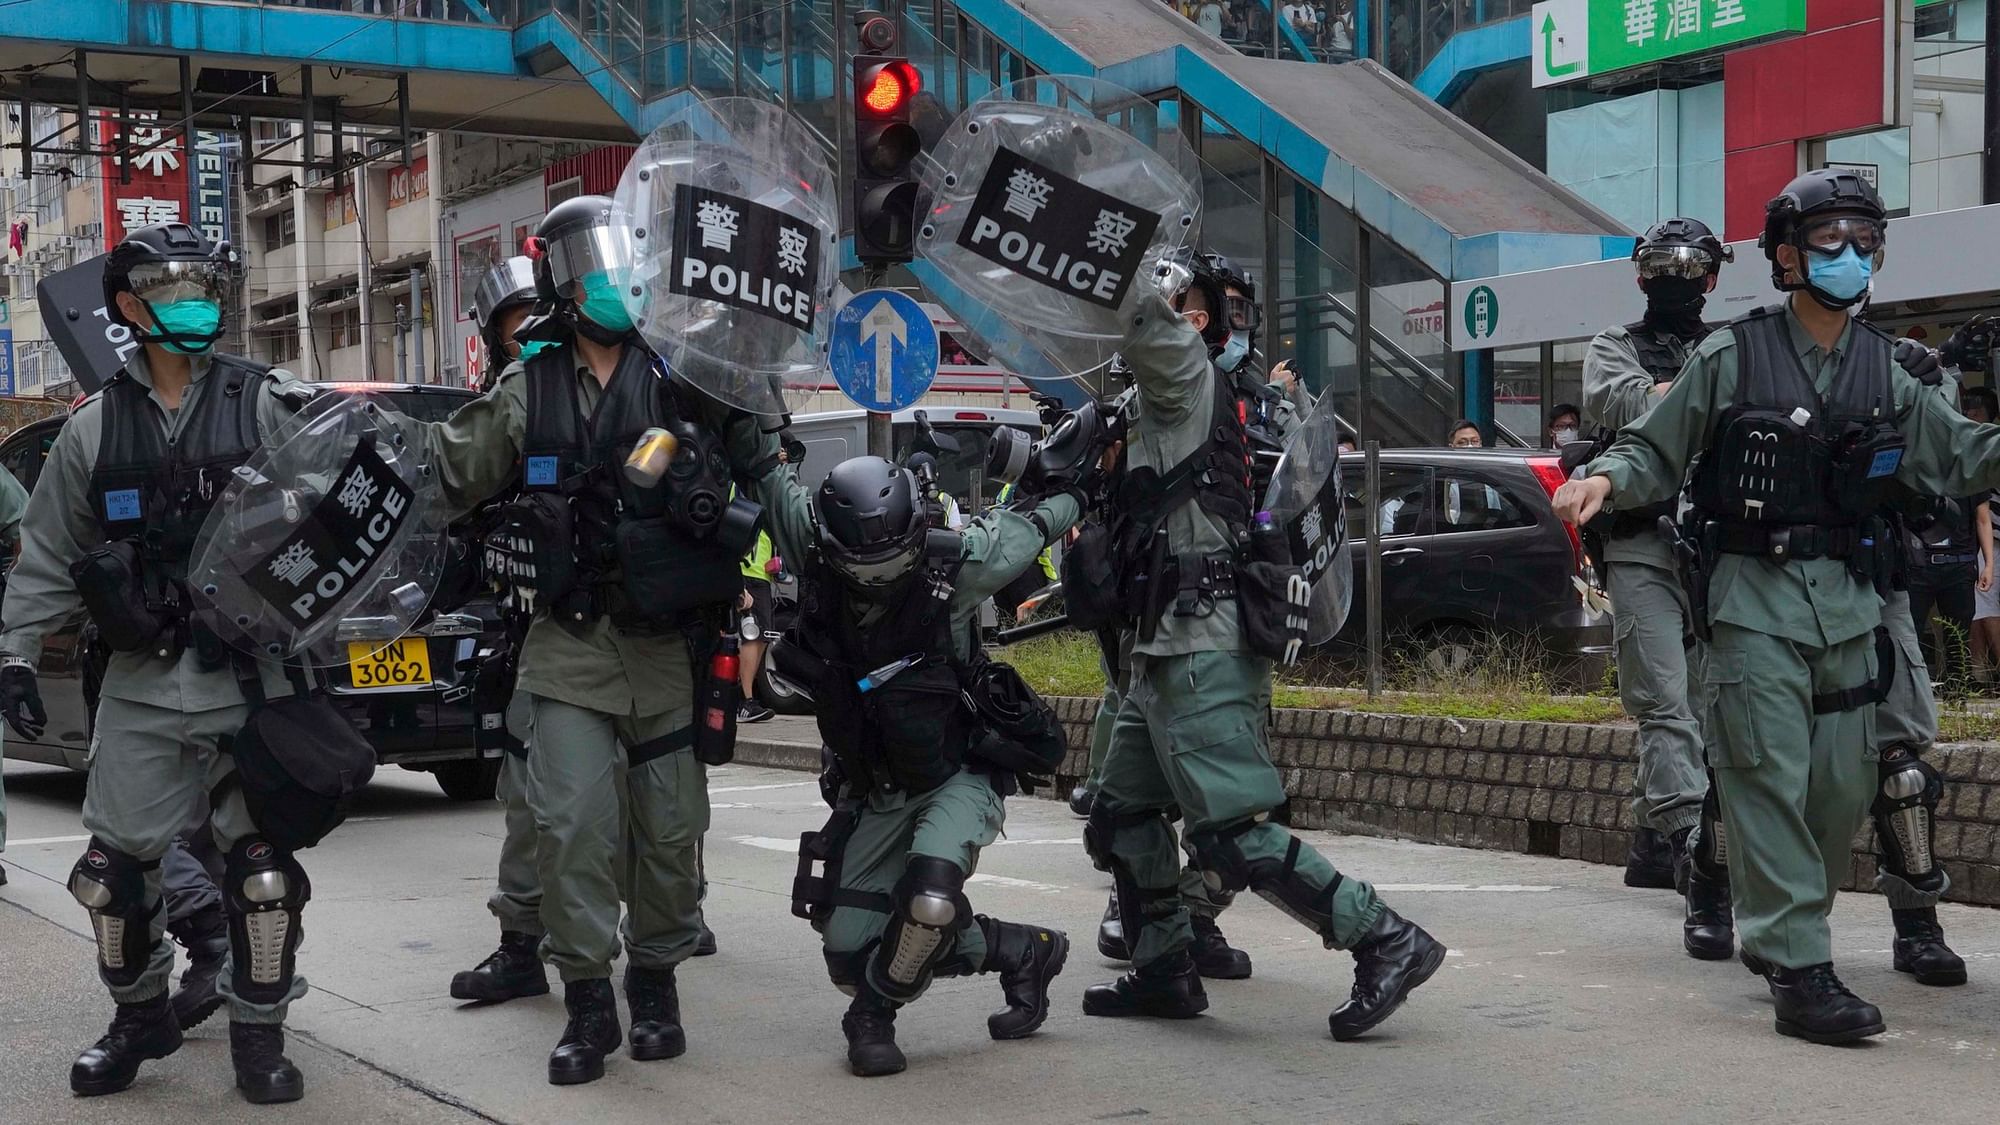 Riot police cover themselves with shields as hundreds of protesters march along a downtown street during a pro-democracy protest against Beijings national security legislation in Hong Kong, Sunday, May 24, 2020.